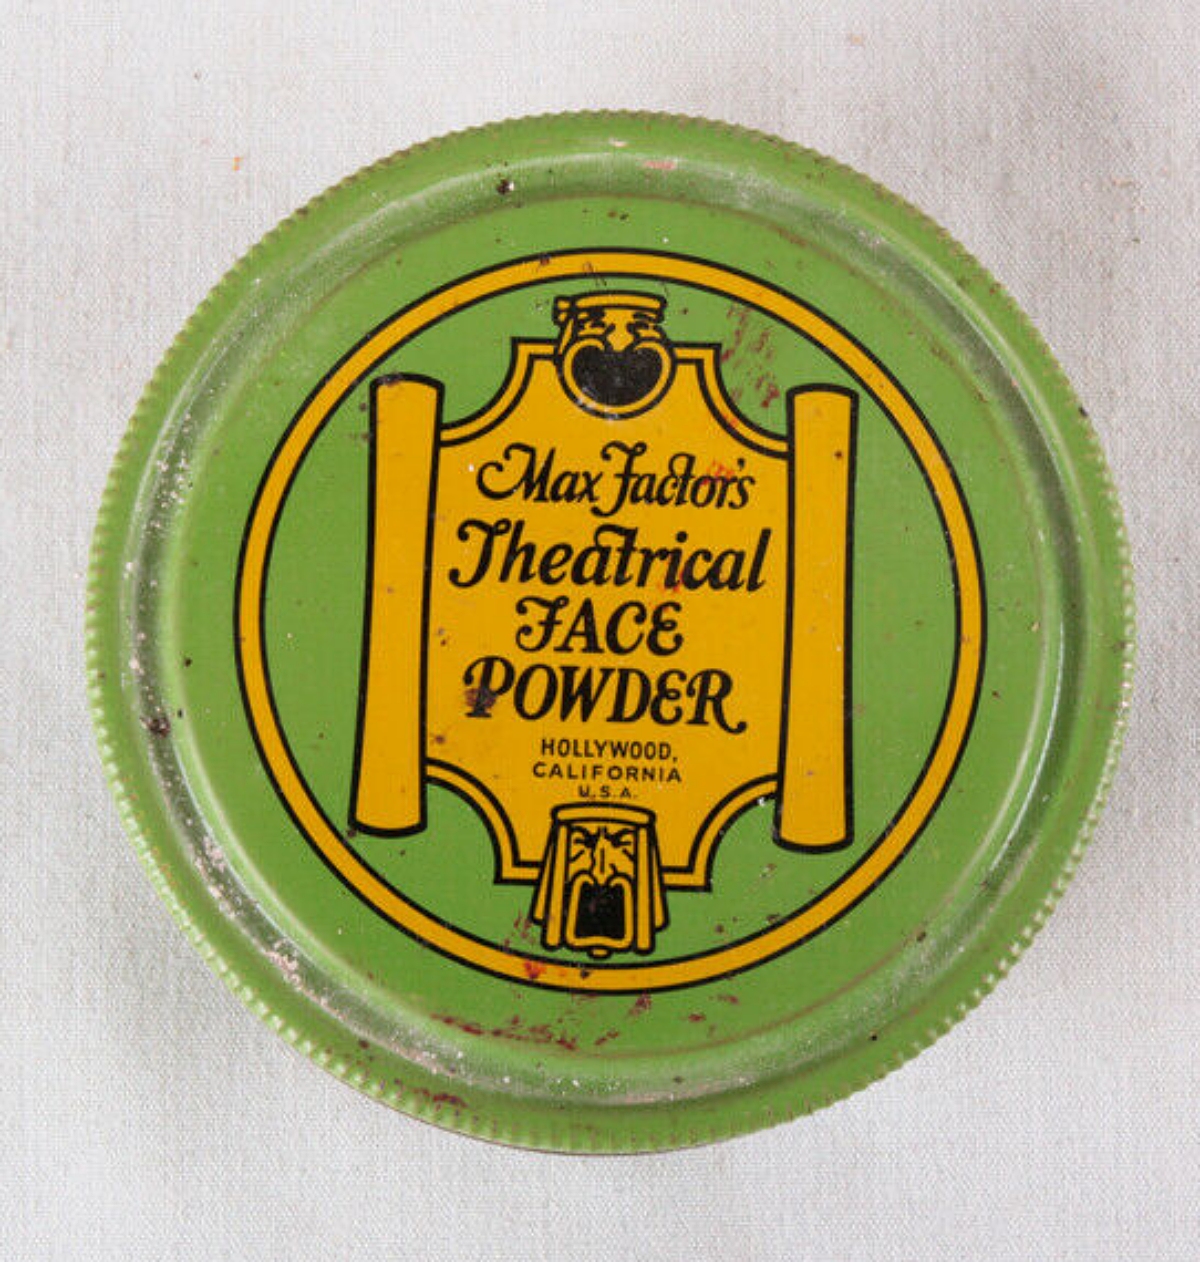 Max Factor Theatrical Face Powder tin from 1930s